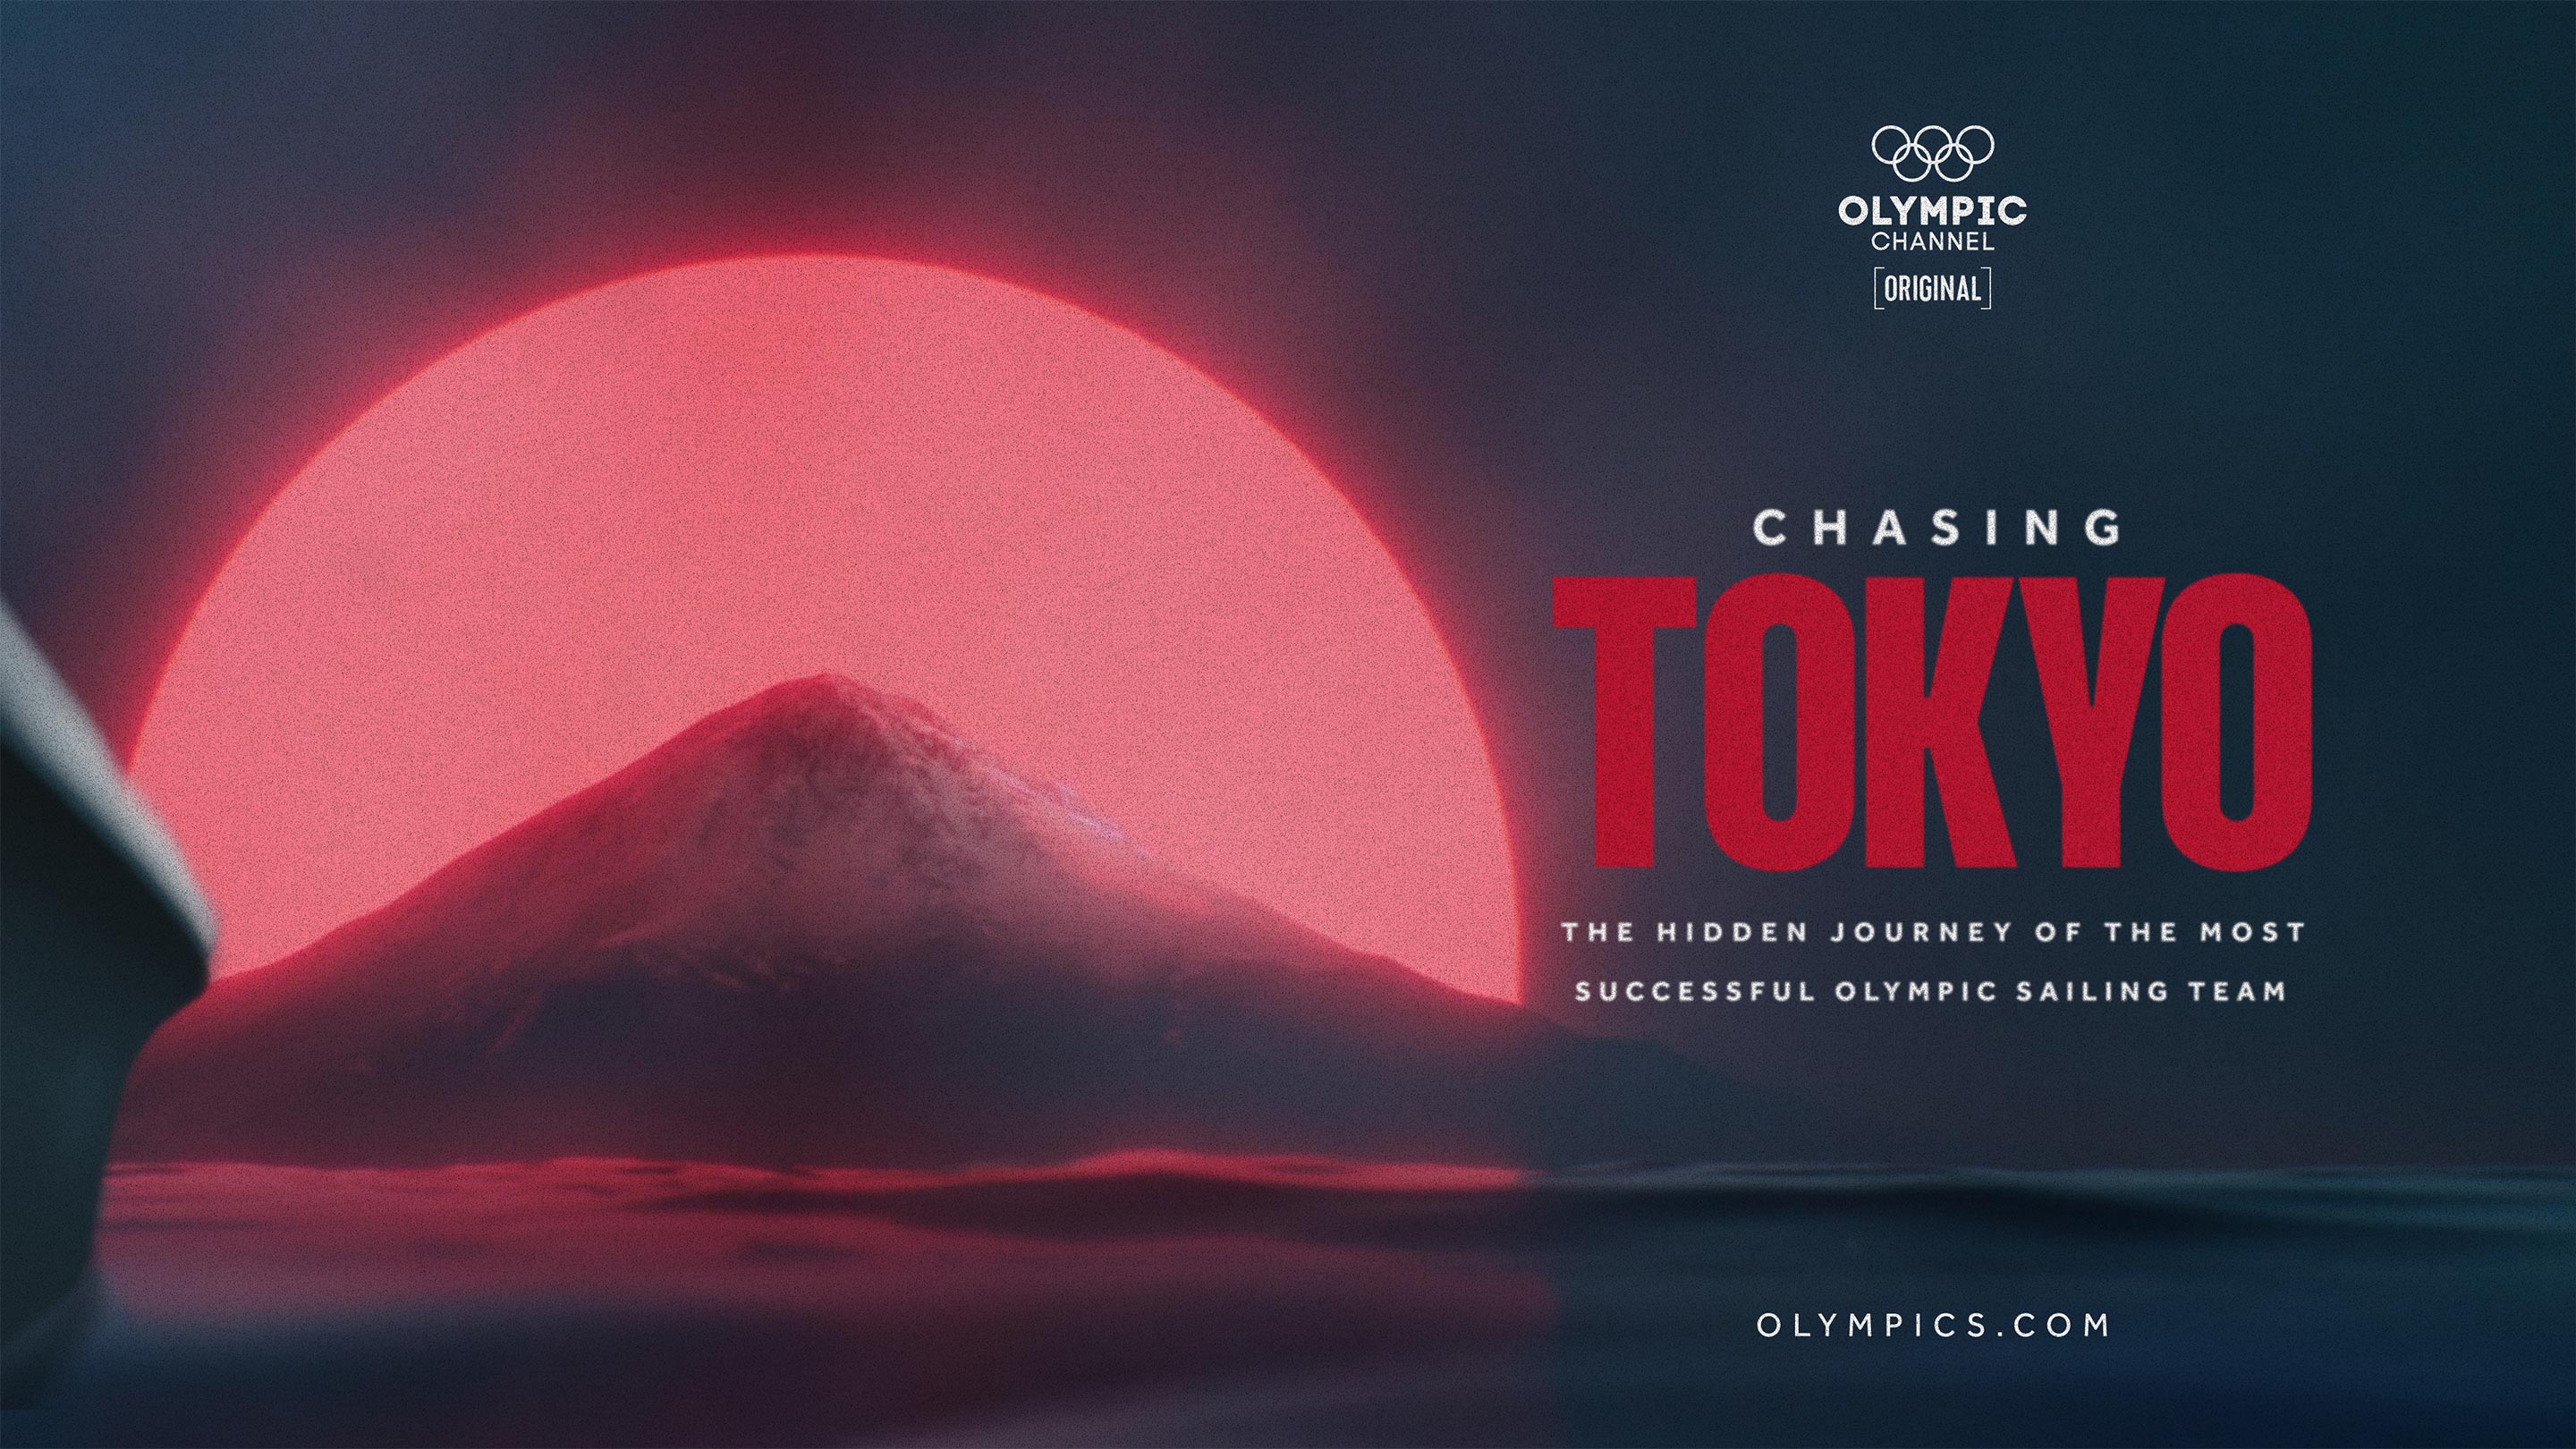 Chasing Tokyo documentary on follows Team GB’s epic Tokyo